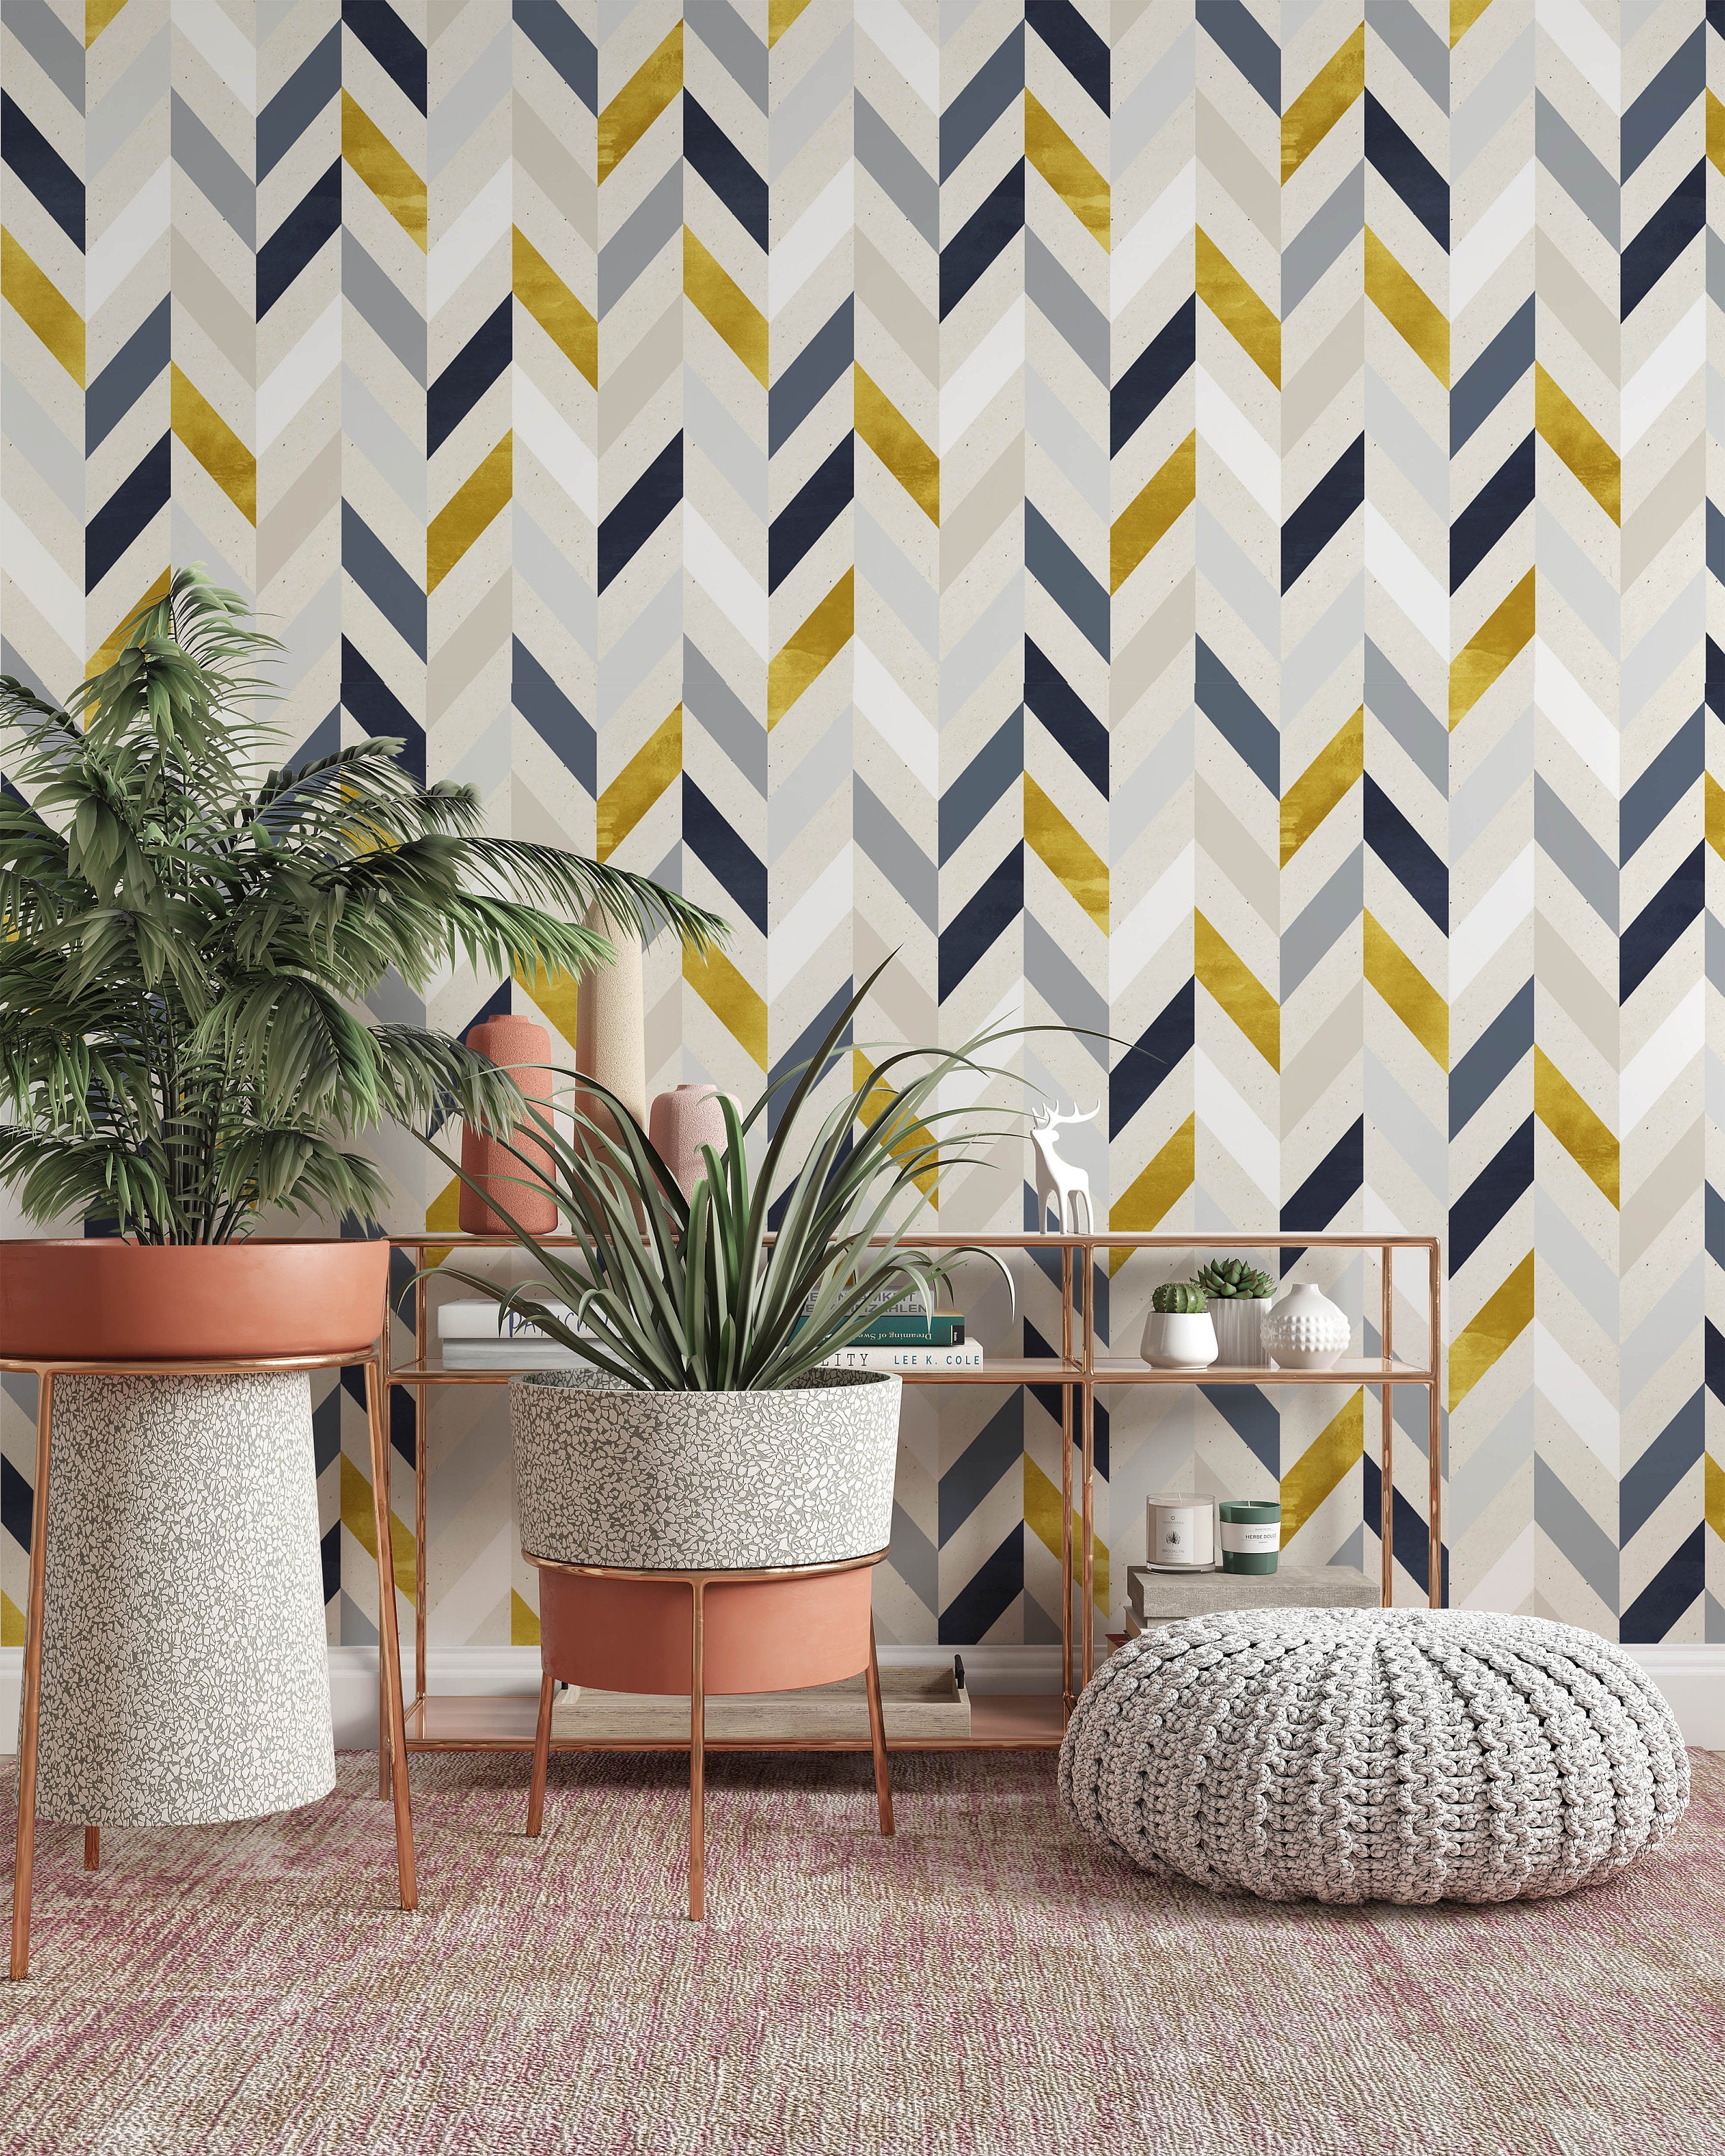 Colorful Geometric Lines Rectanges Shapes Modern Wallpaper